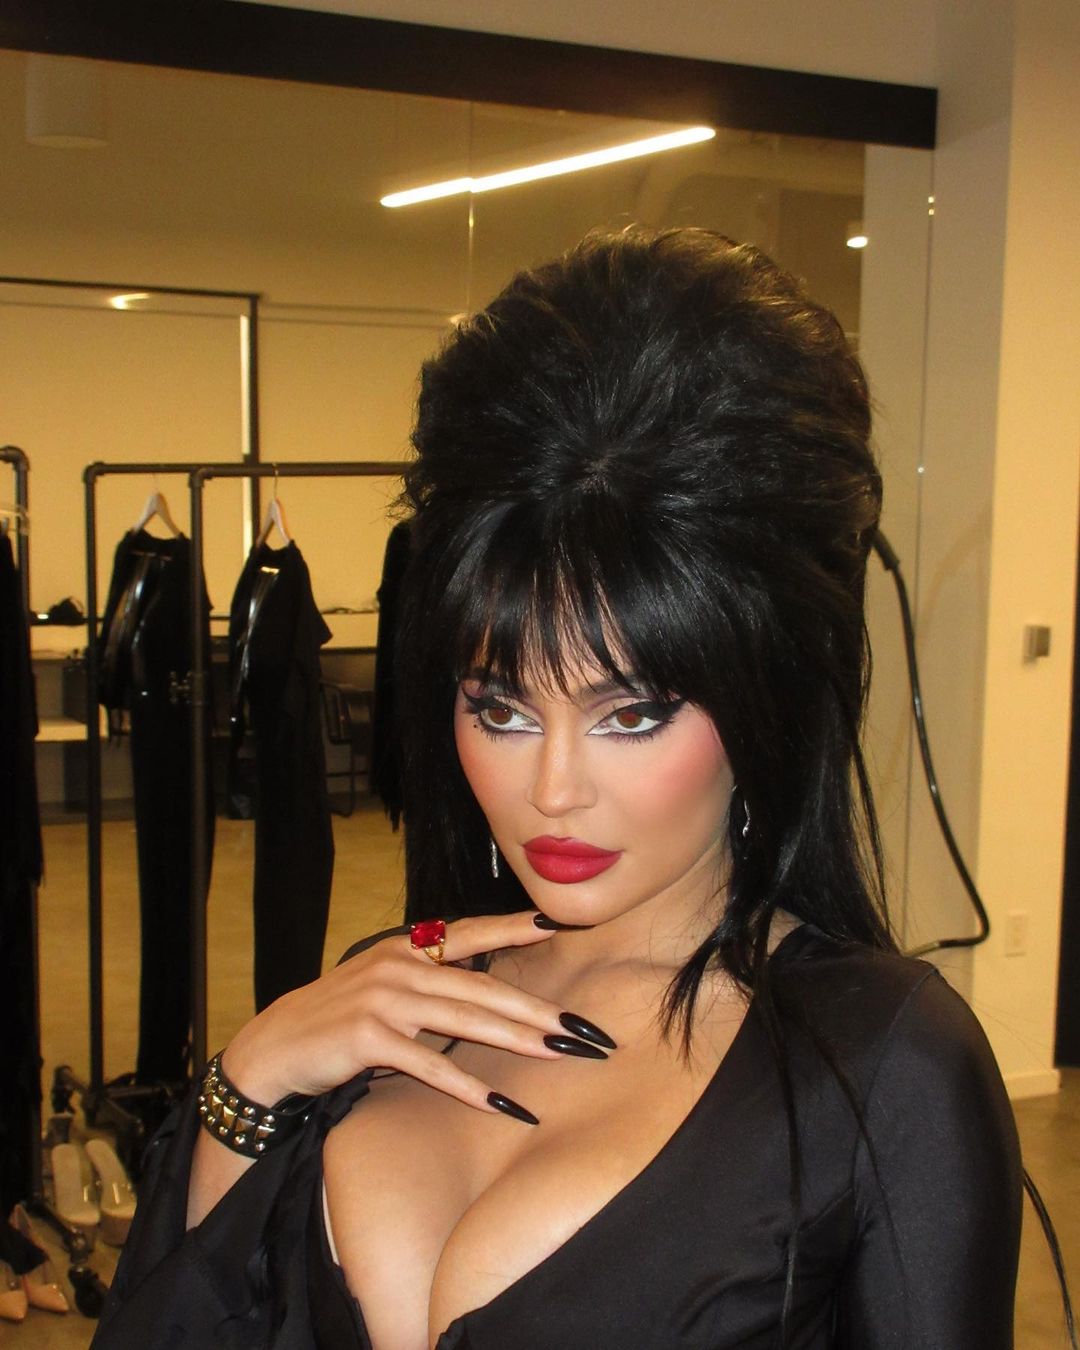 Kylie Jenner almost busts out of plunging tight dress as star channels Elvira in raunchiest Halloween video yet